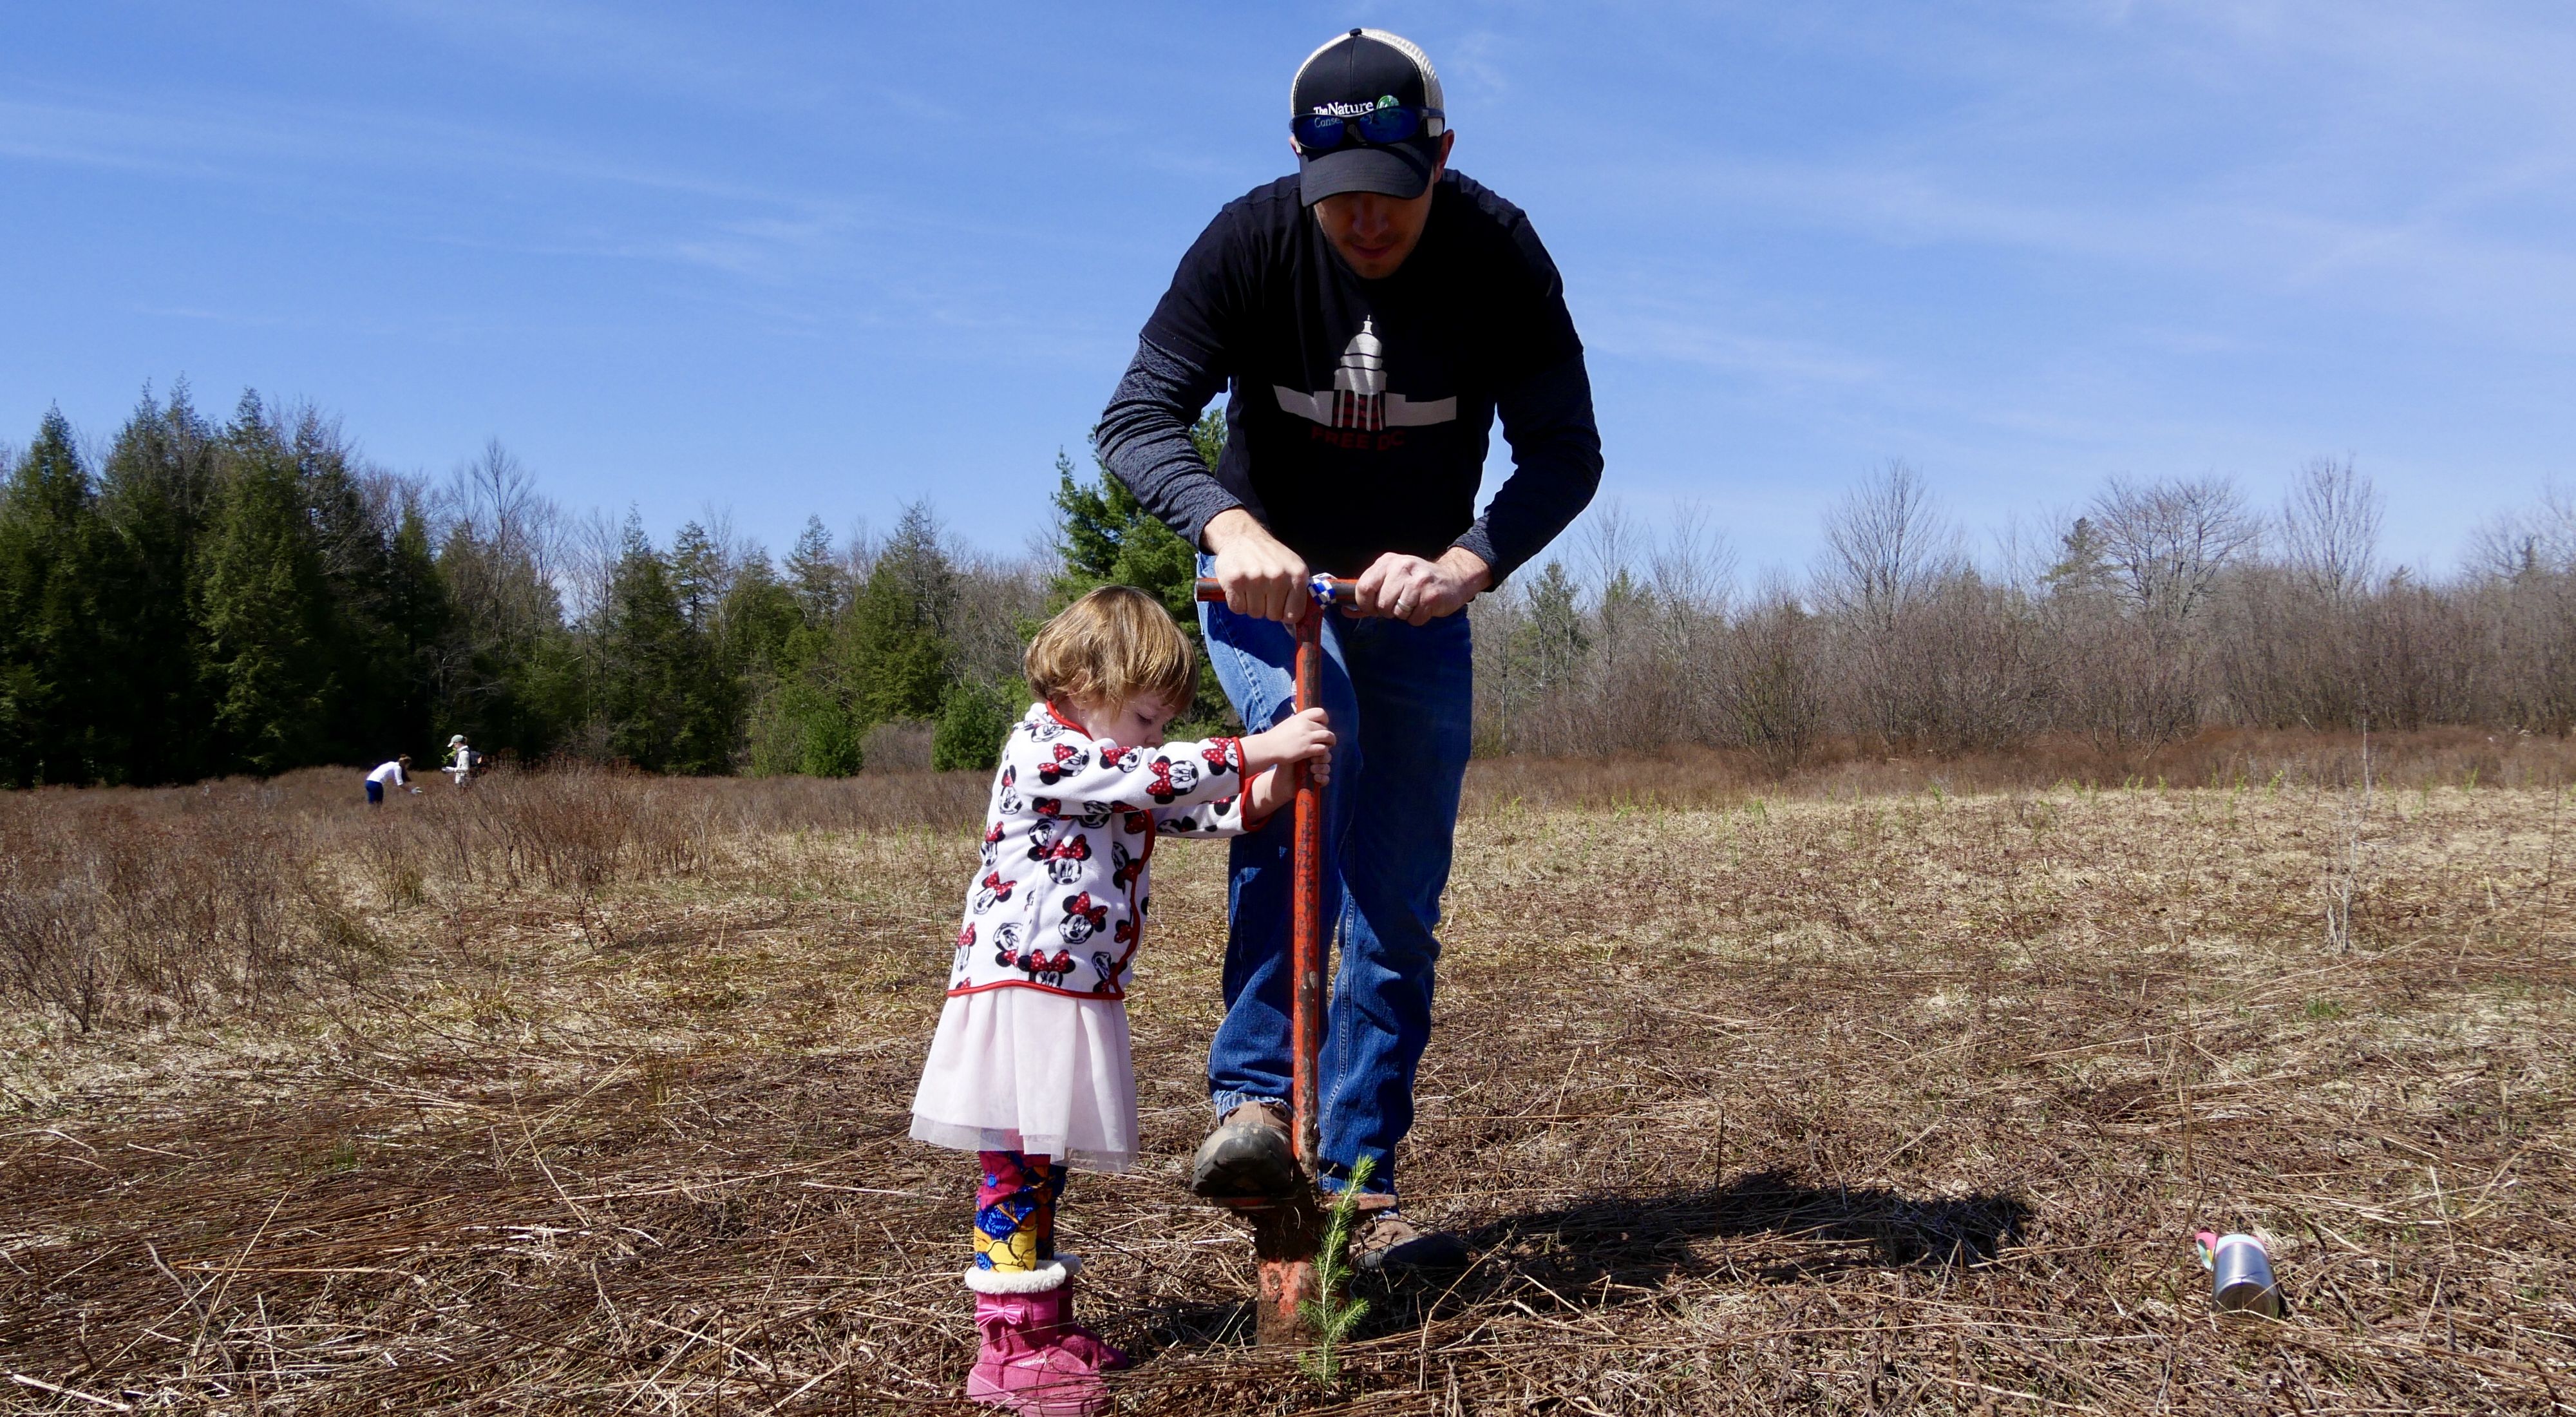 A man and toddler girl in a pink tutu use a long handled digging tool to plant a tree seedling. They are in an open field ringed by tall cedar trees.